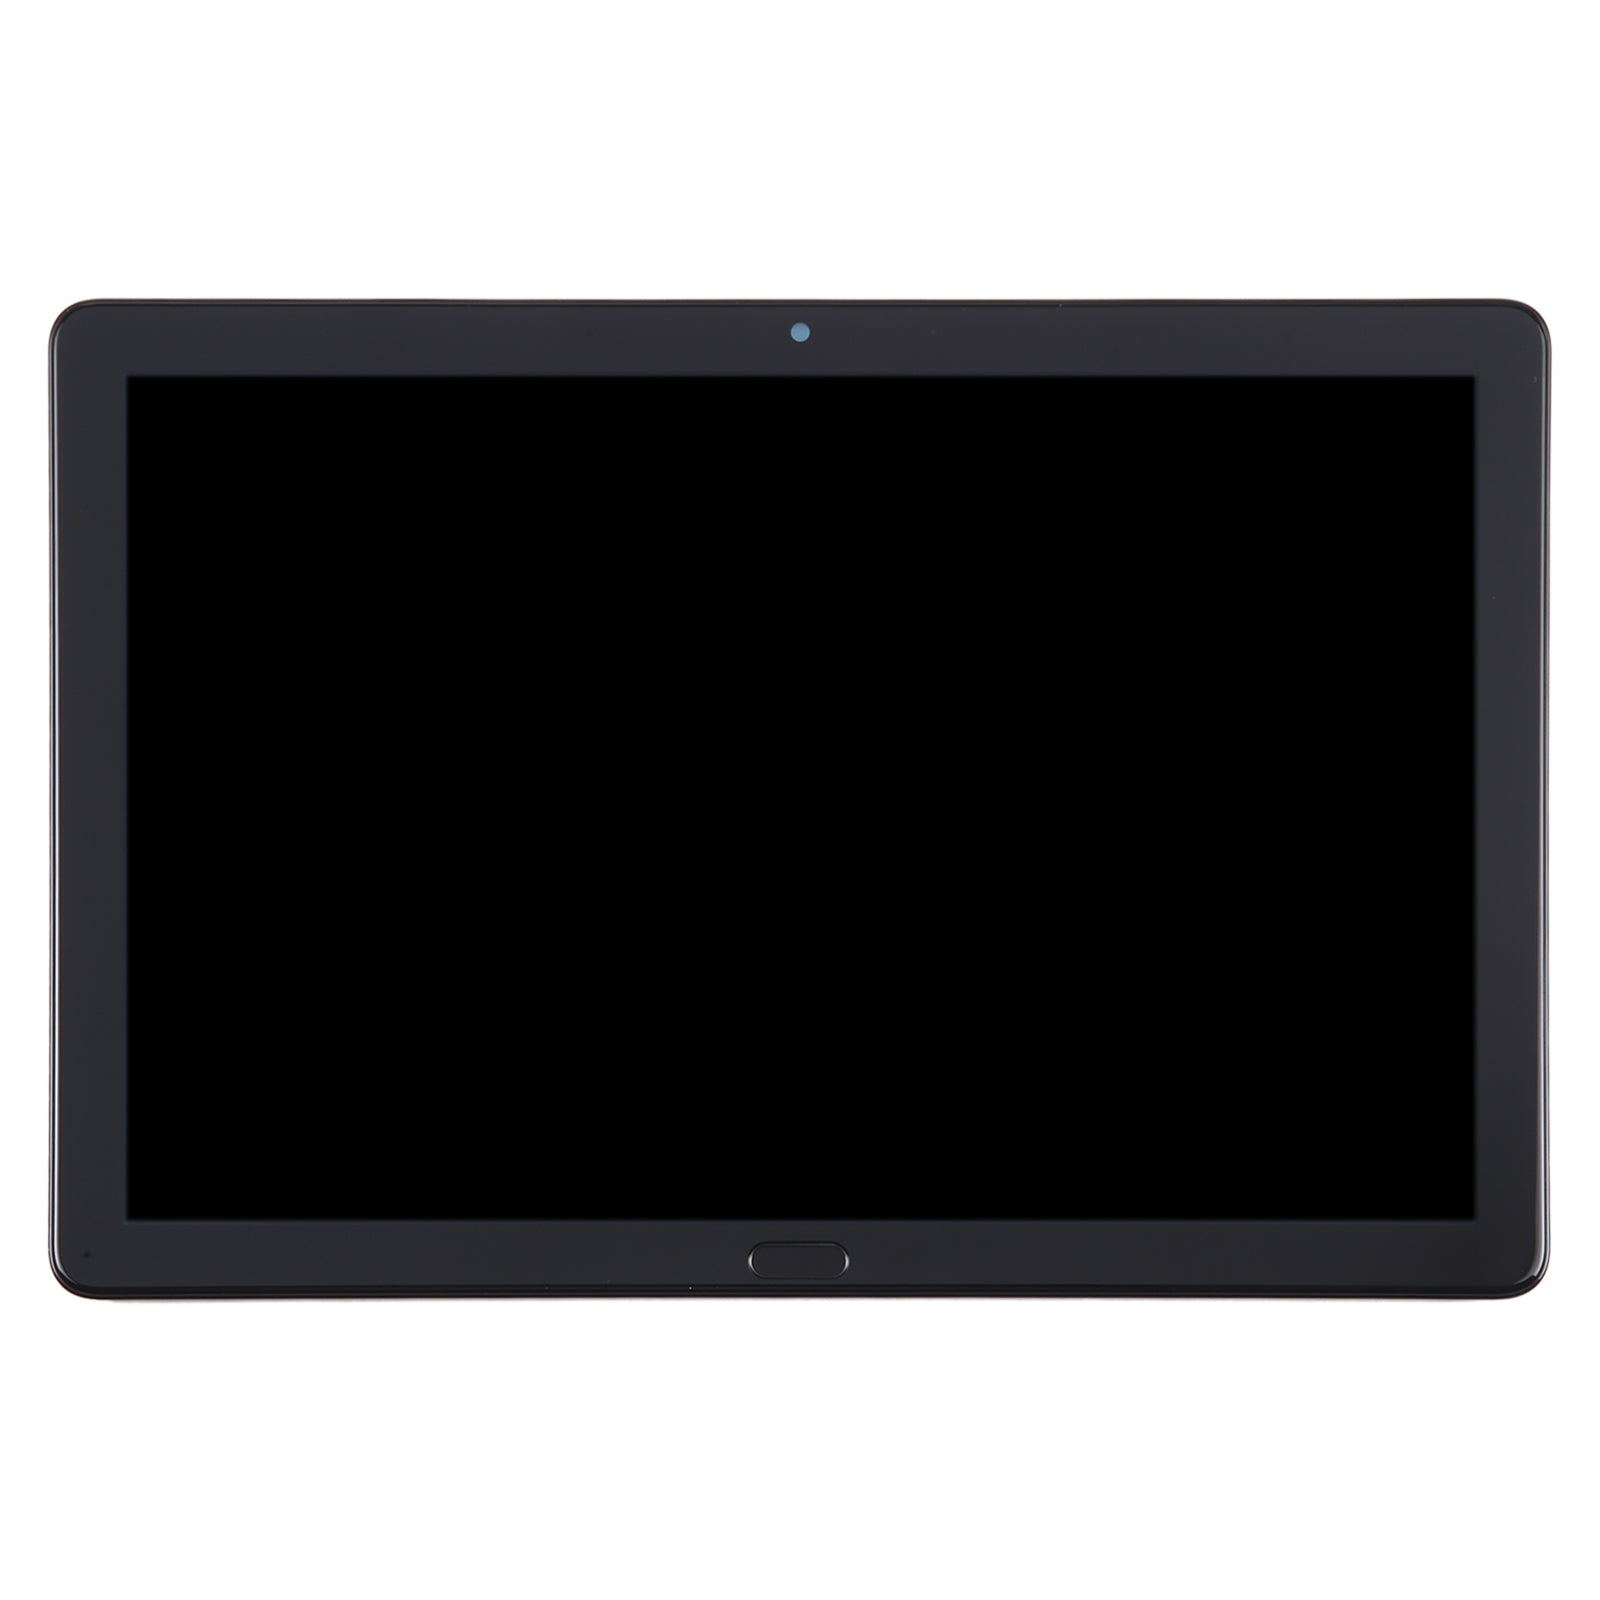 LCD with Touch Screen for Huawei MediaPad M5 lite - Black by